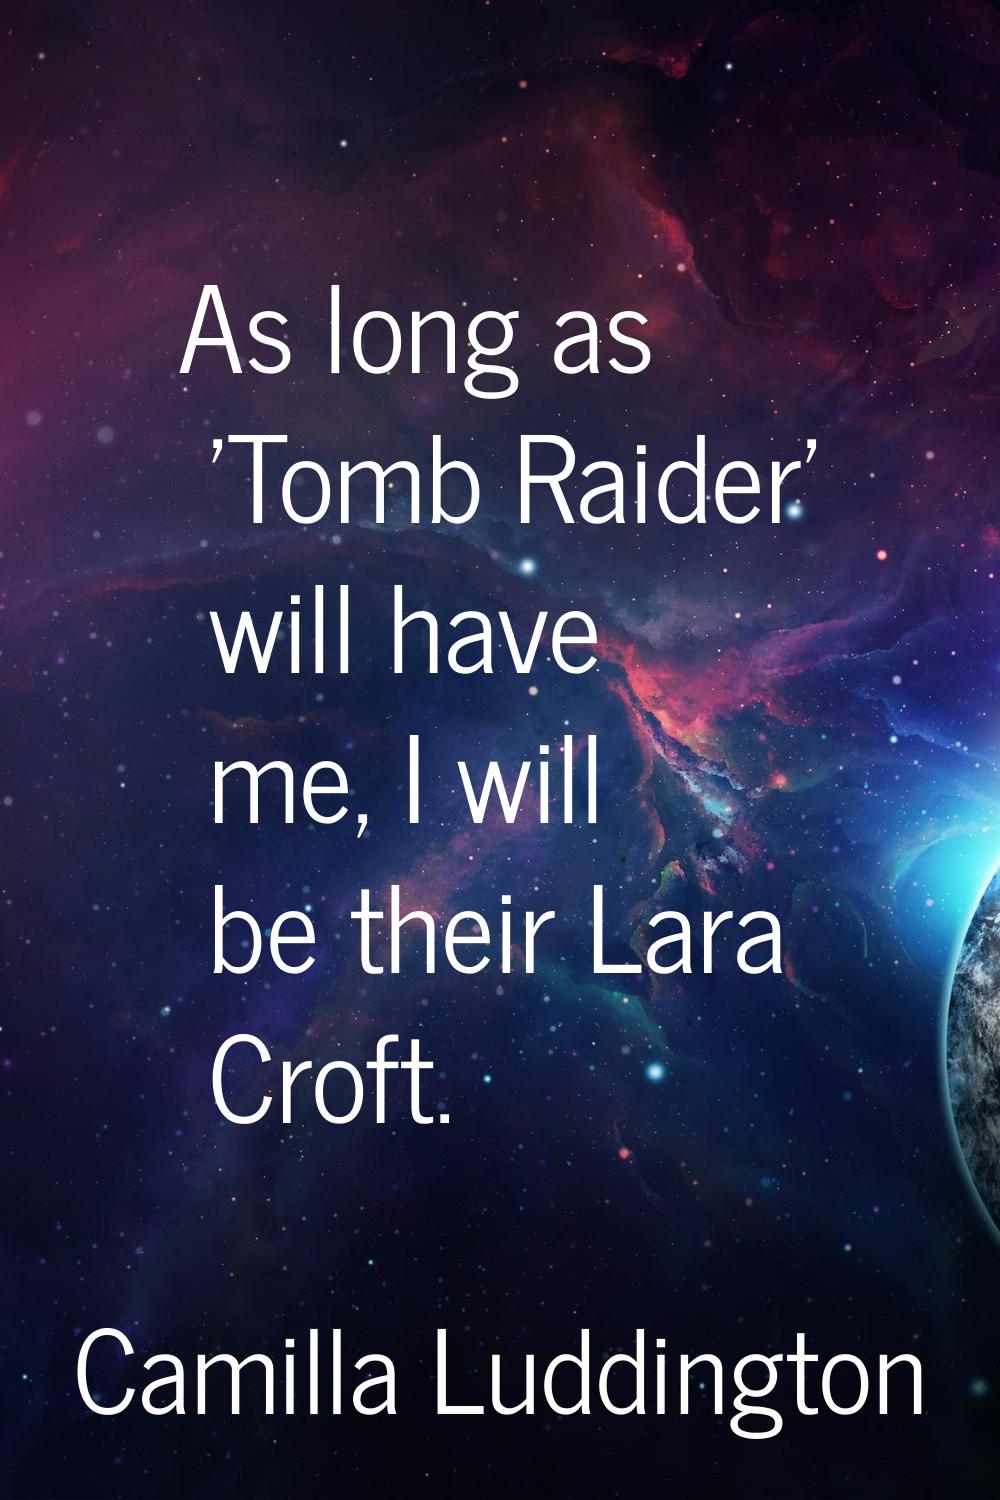 As long as 'Tomb Raider' will have me, I will be their Lara Croft.